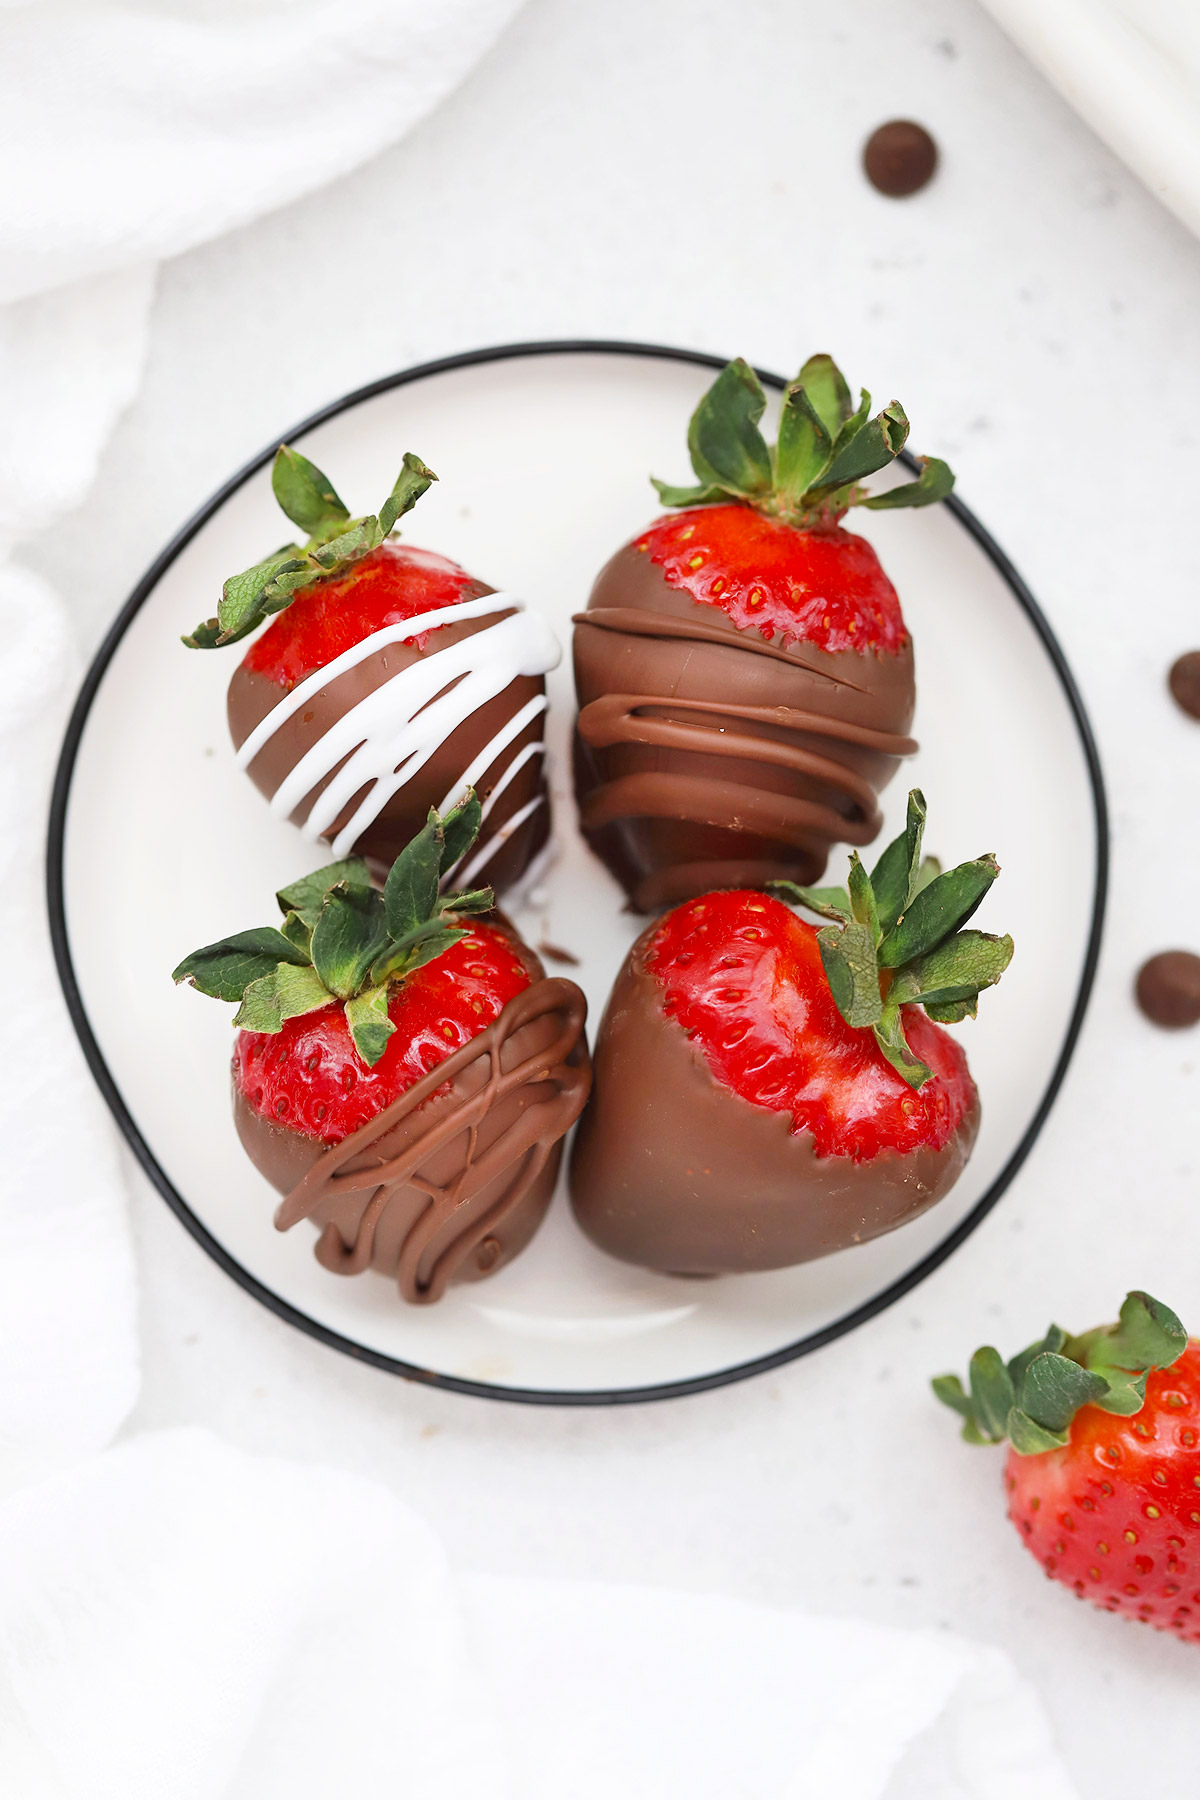 Overhead view of dairy-free chocolate covered strawberries on a white plate.